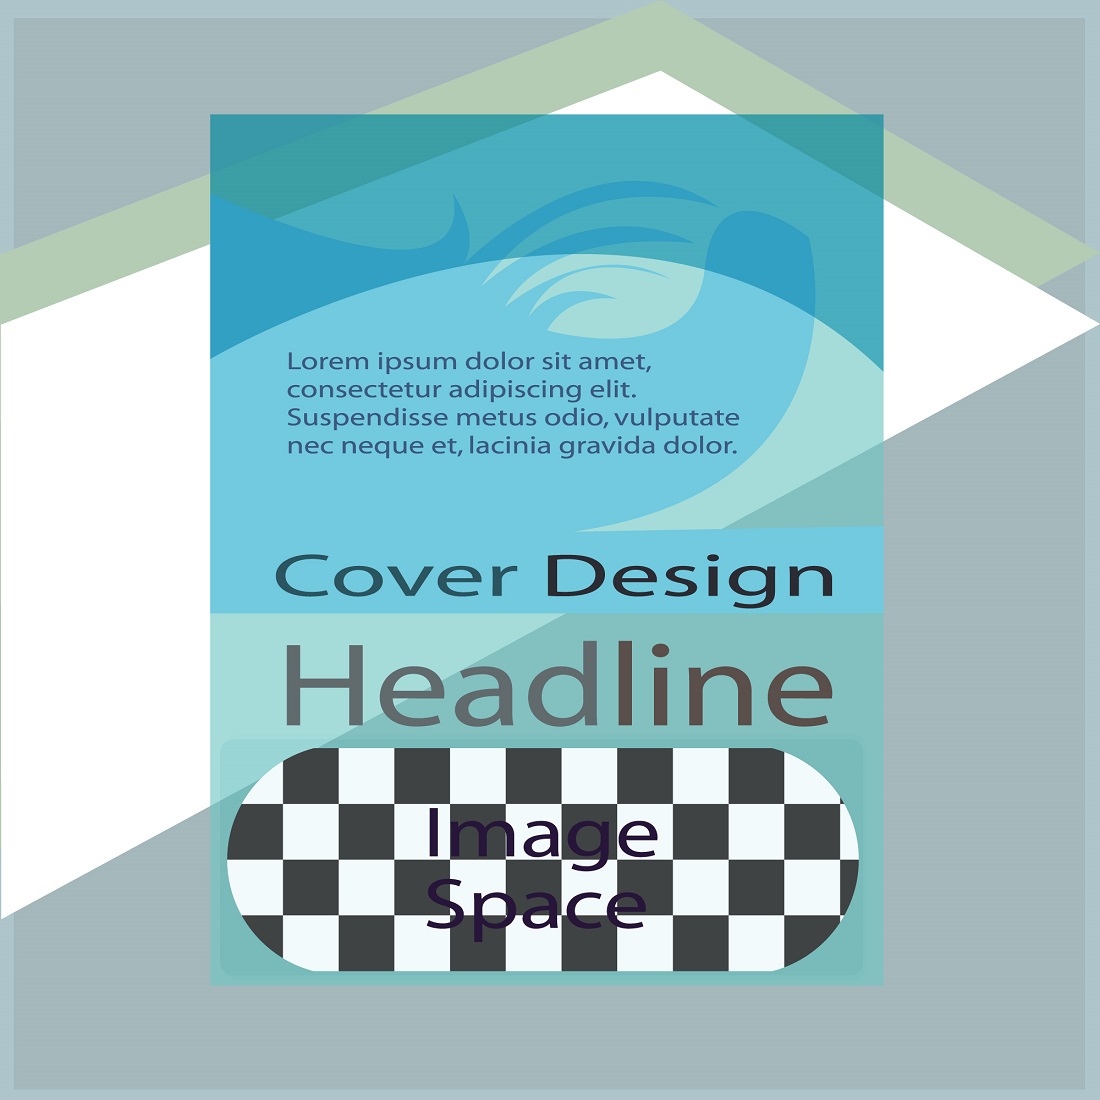 This cover bundle design is prepared for graphics, print and web preview image.